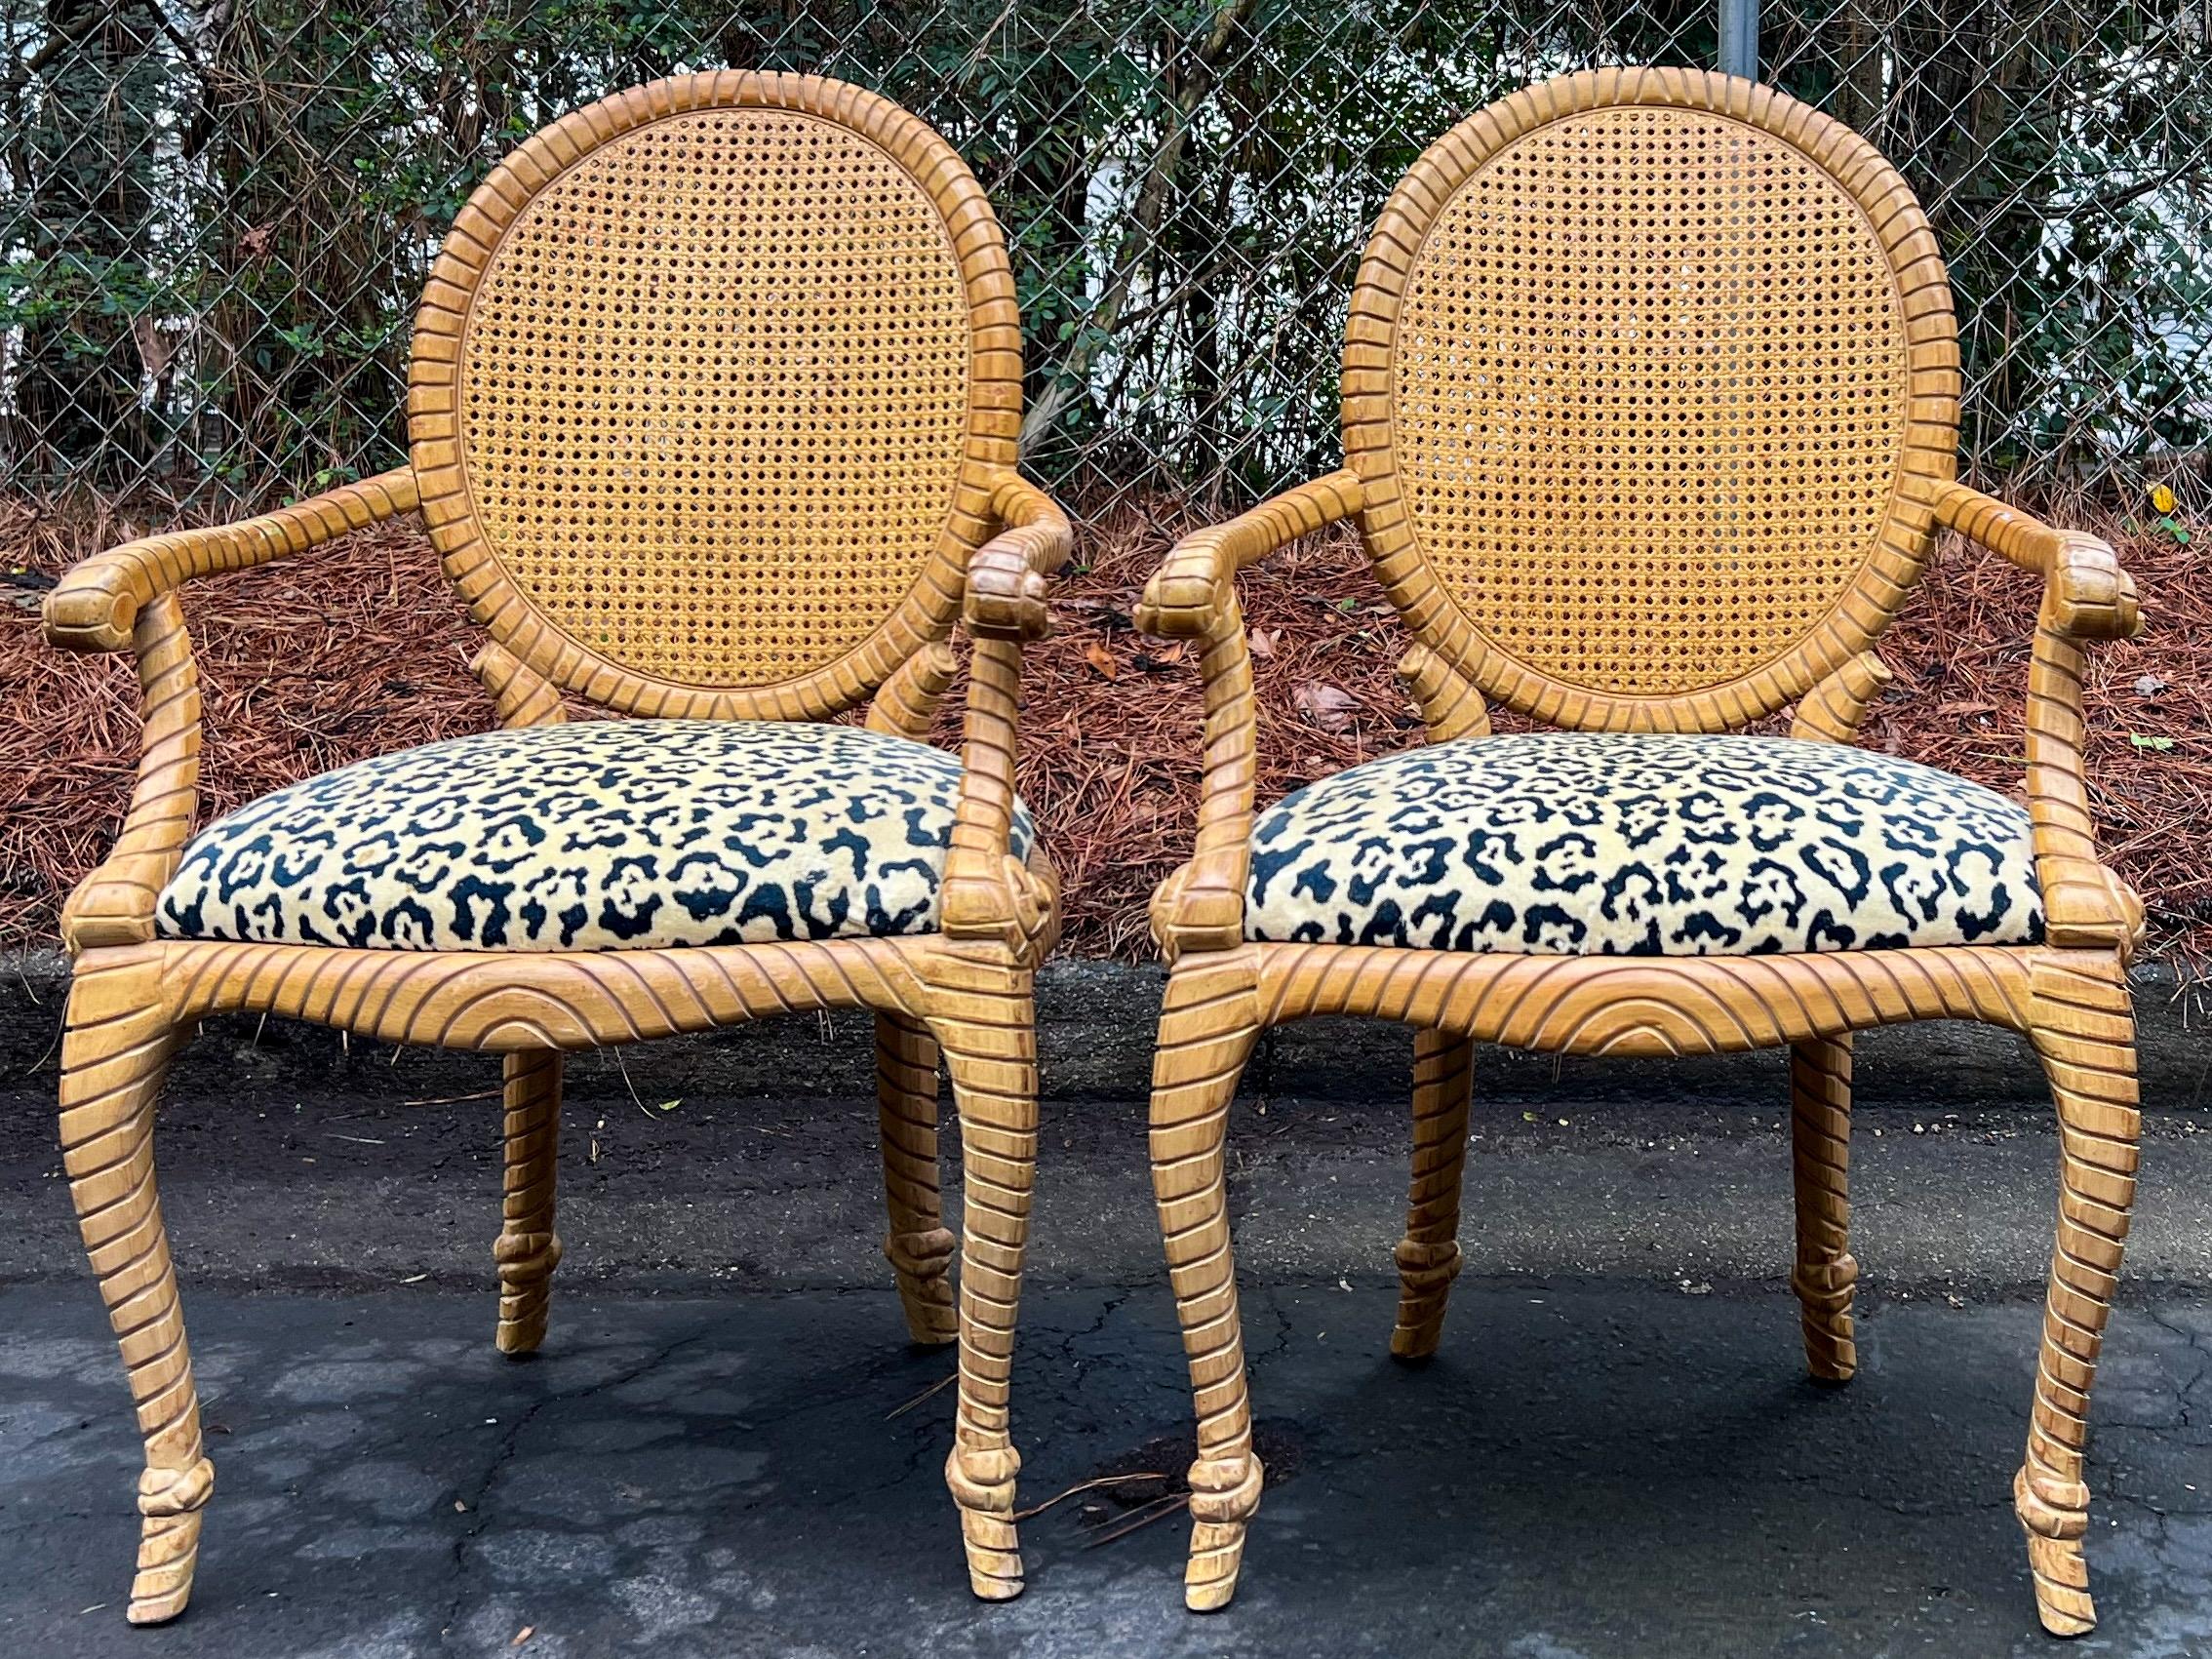 This is a pair of Hollywood Regency style carved tassel /knot bergere chairs. The chairs are upholstered in a vintage leopard velvet. The arm height is 26.5”. The frames are pine and somewhat cerused.

My shipping is for the Continental US only.